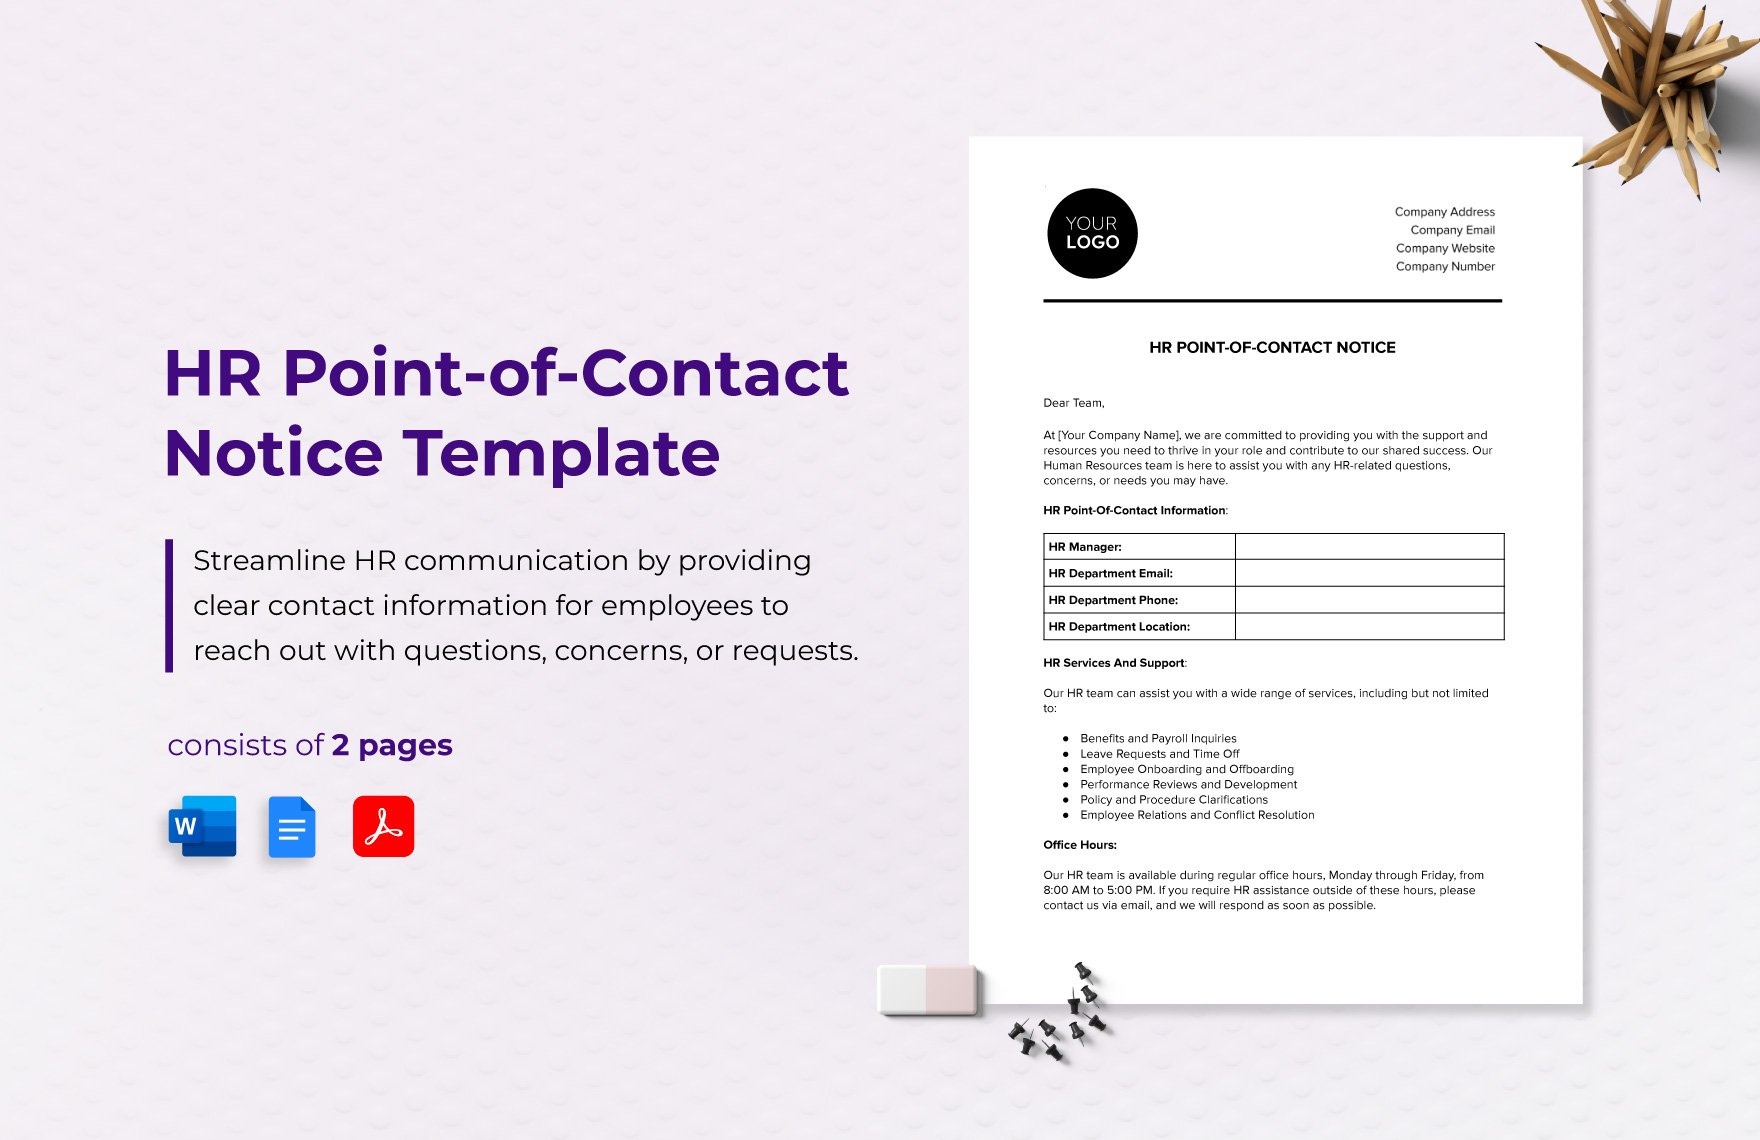 HR Point-of-Contact Notice Template in Word, Google Docs, PDF